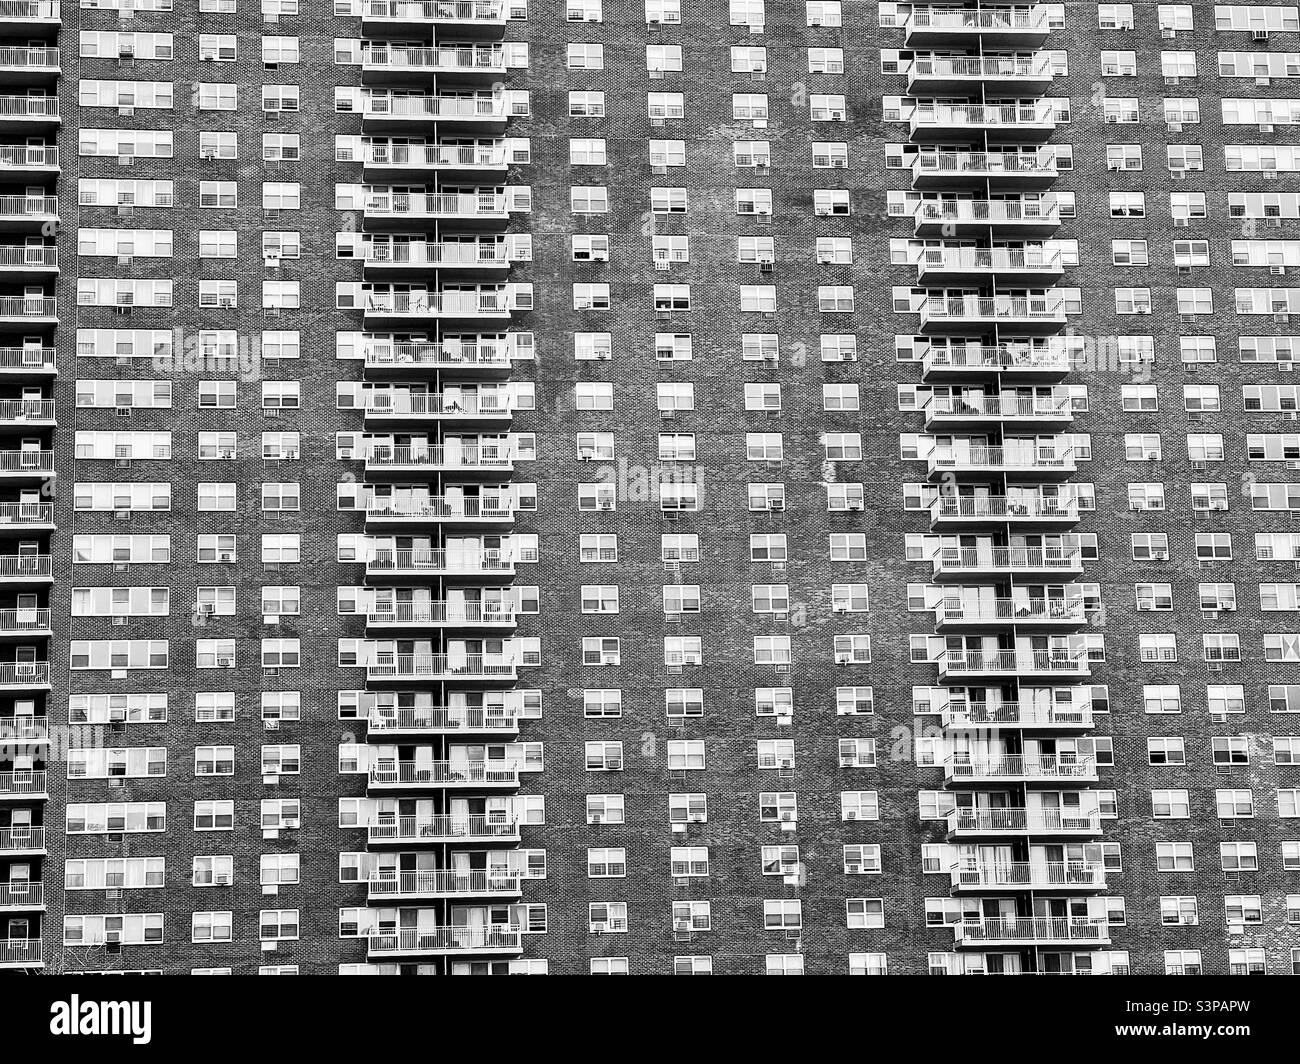 Apartment building in New York City, USA. Stock Photo